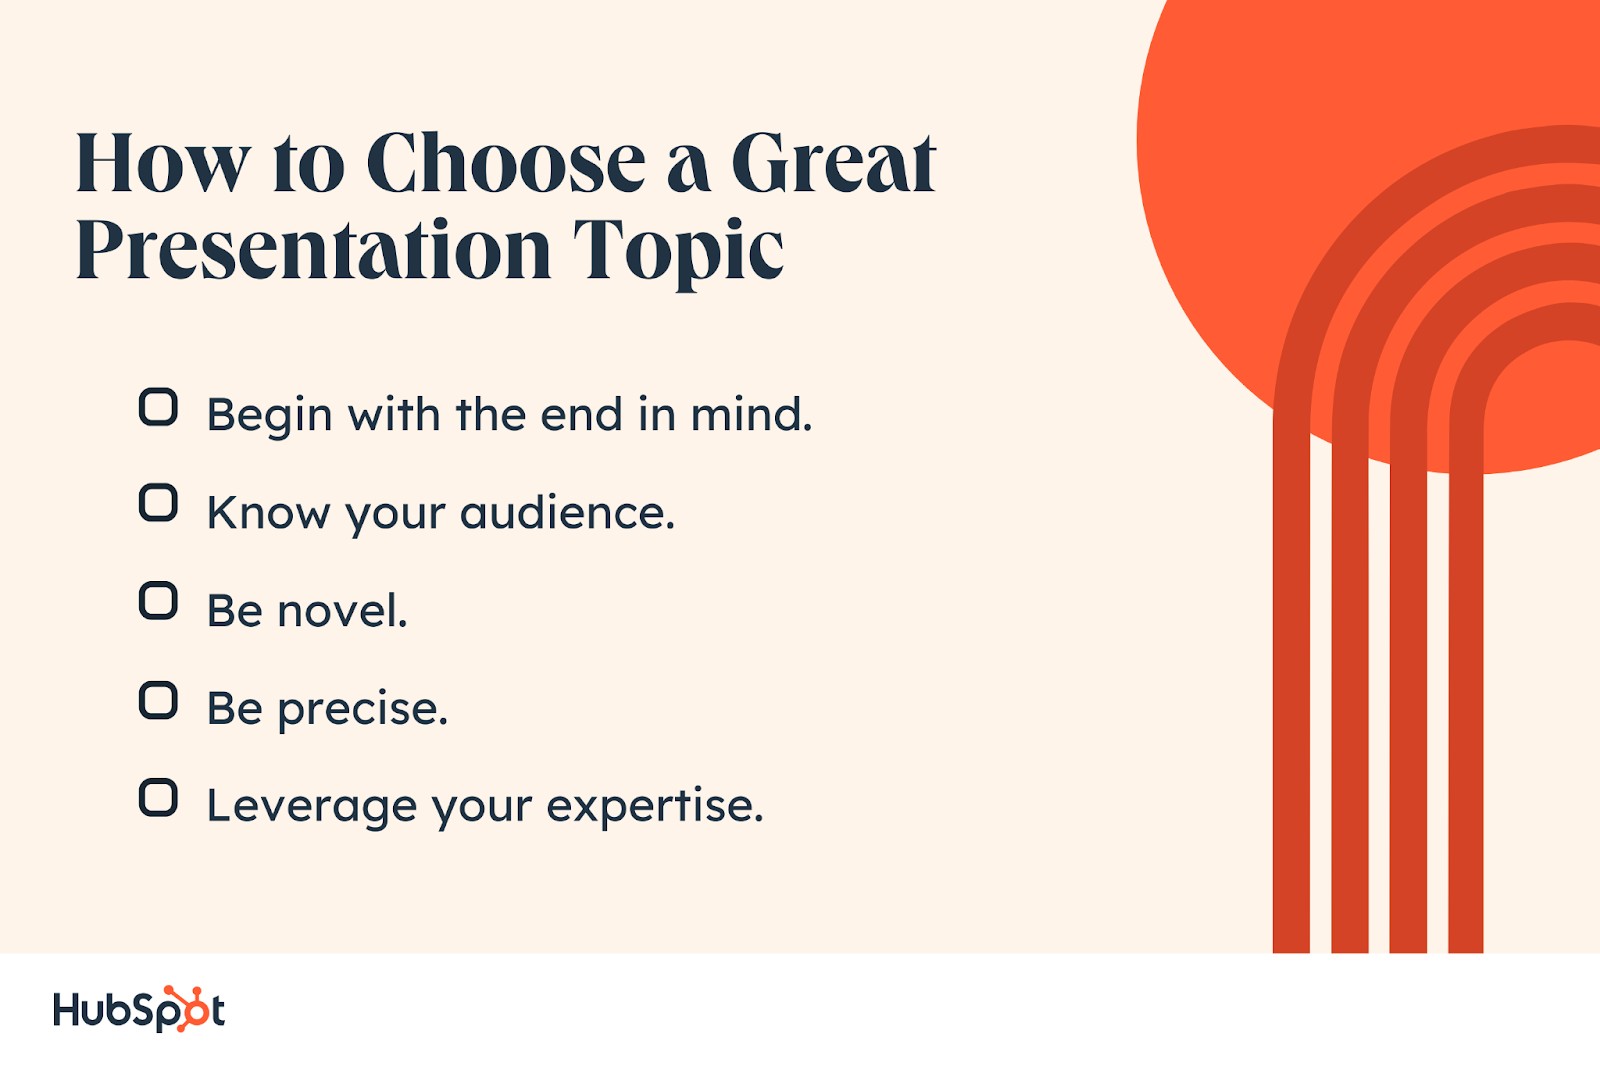 How to Choose a Great Presentation Topic. Be novel. Begin with the end in mind.